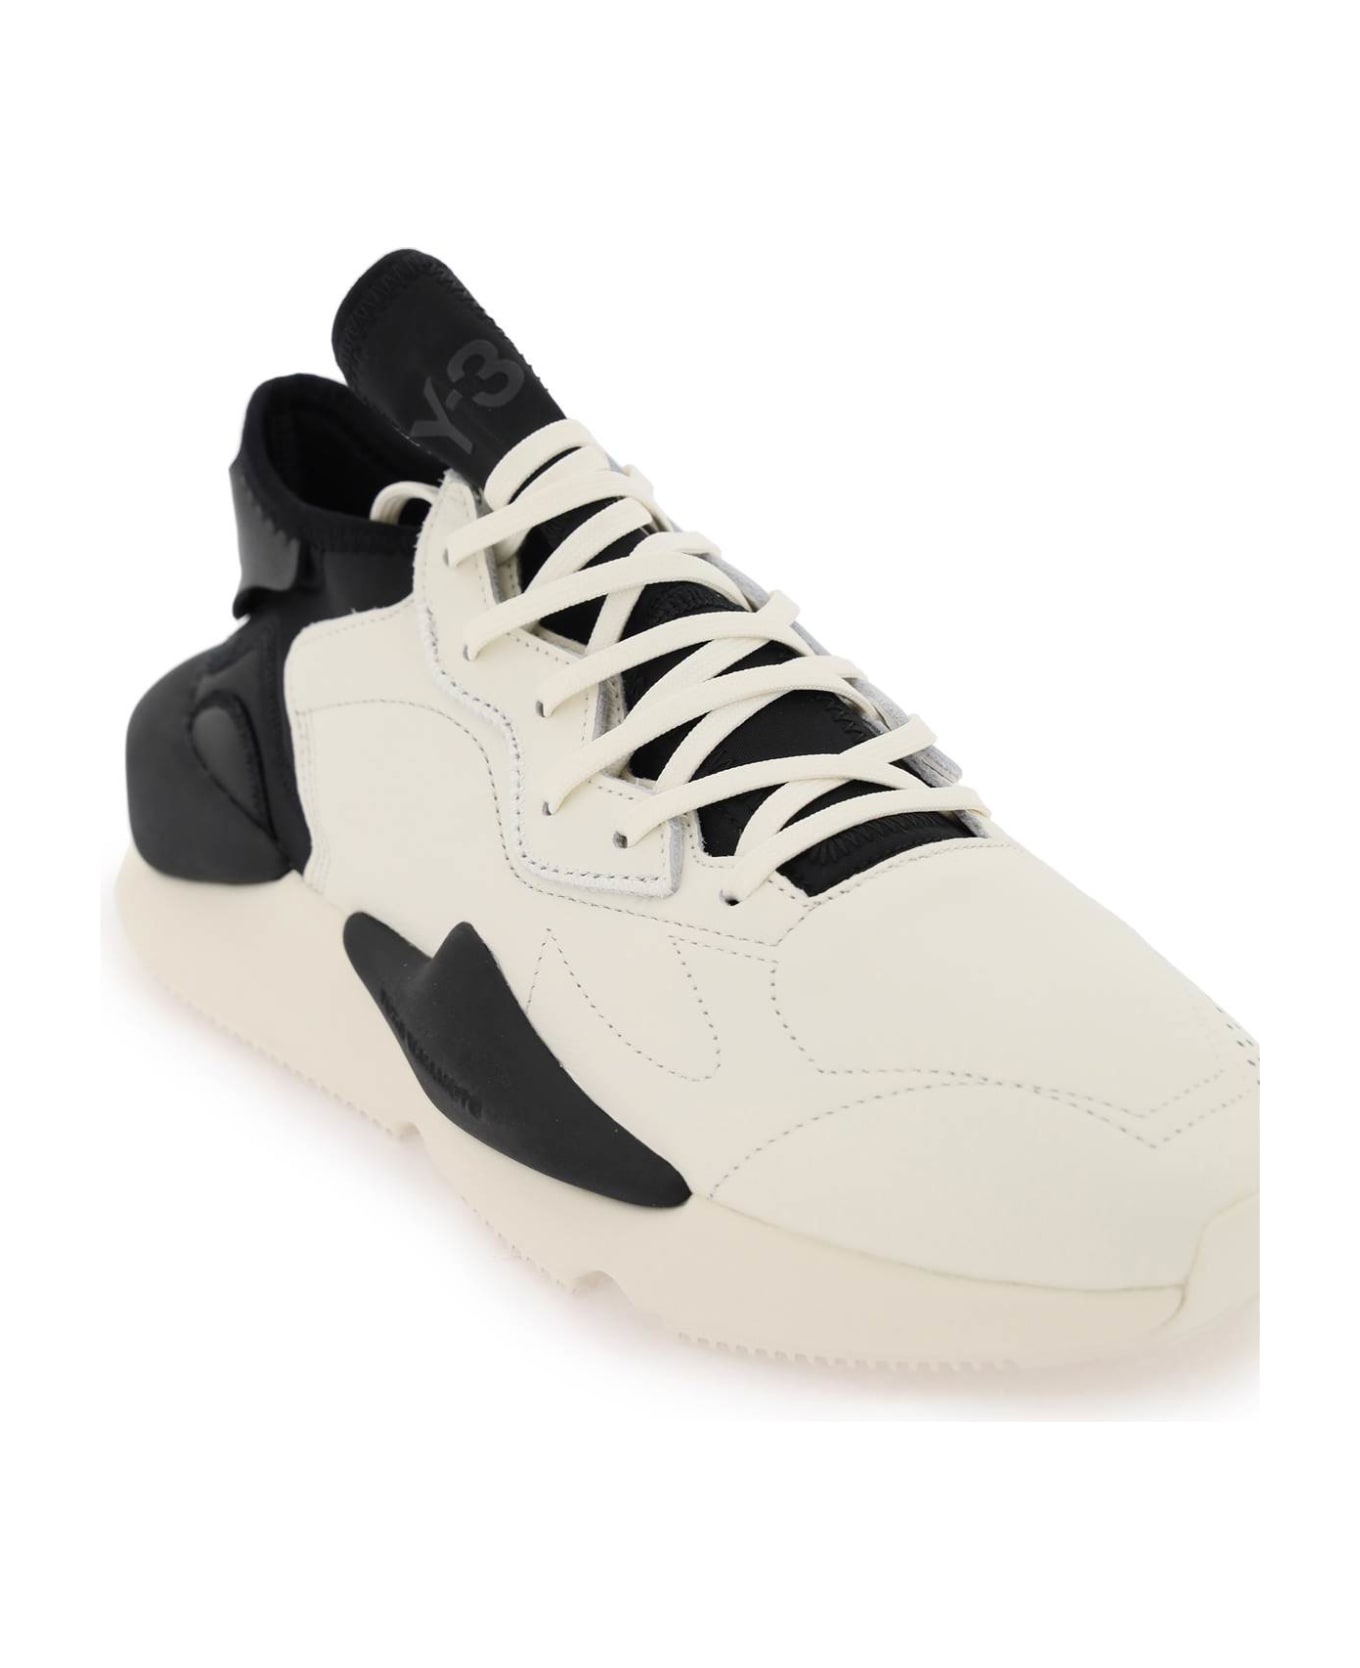 Y-3 Kaiwa Leather And Fabric Low-top Sneakers - White